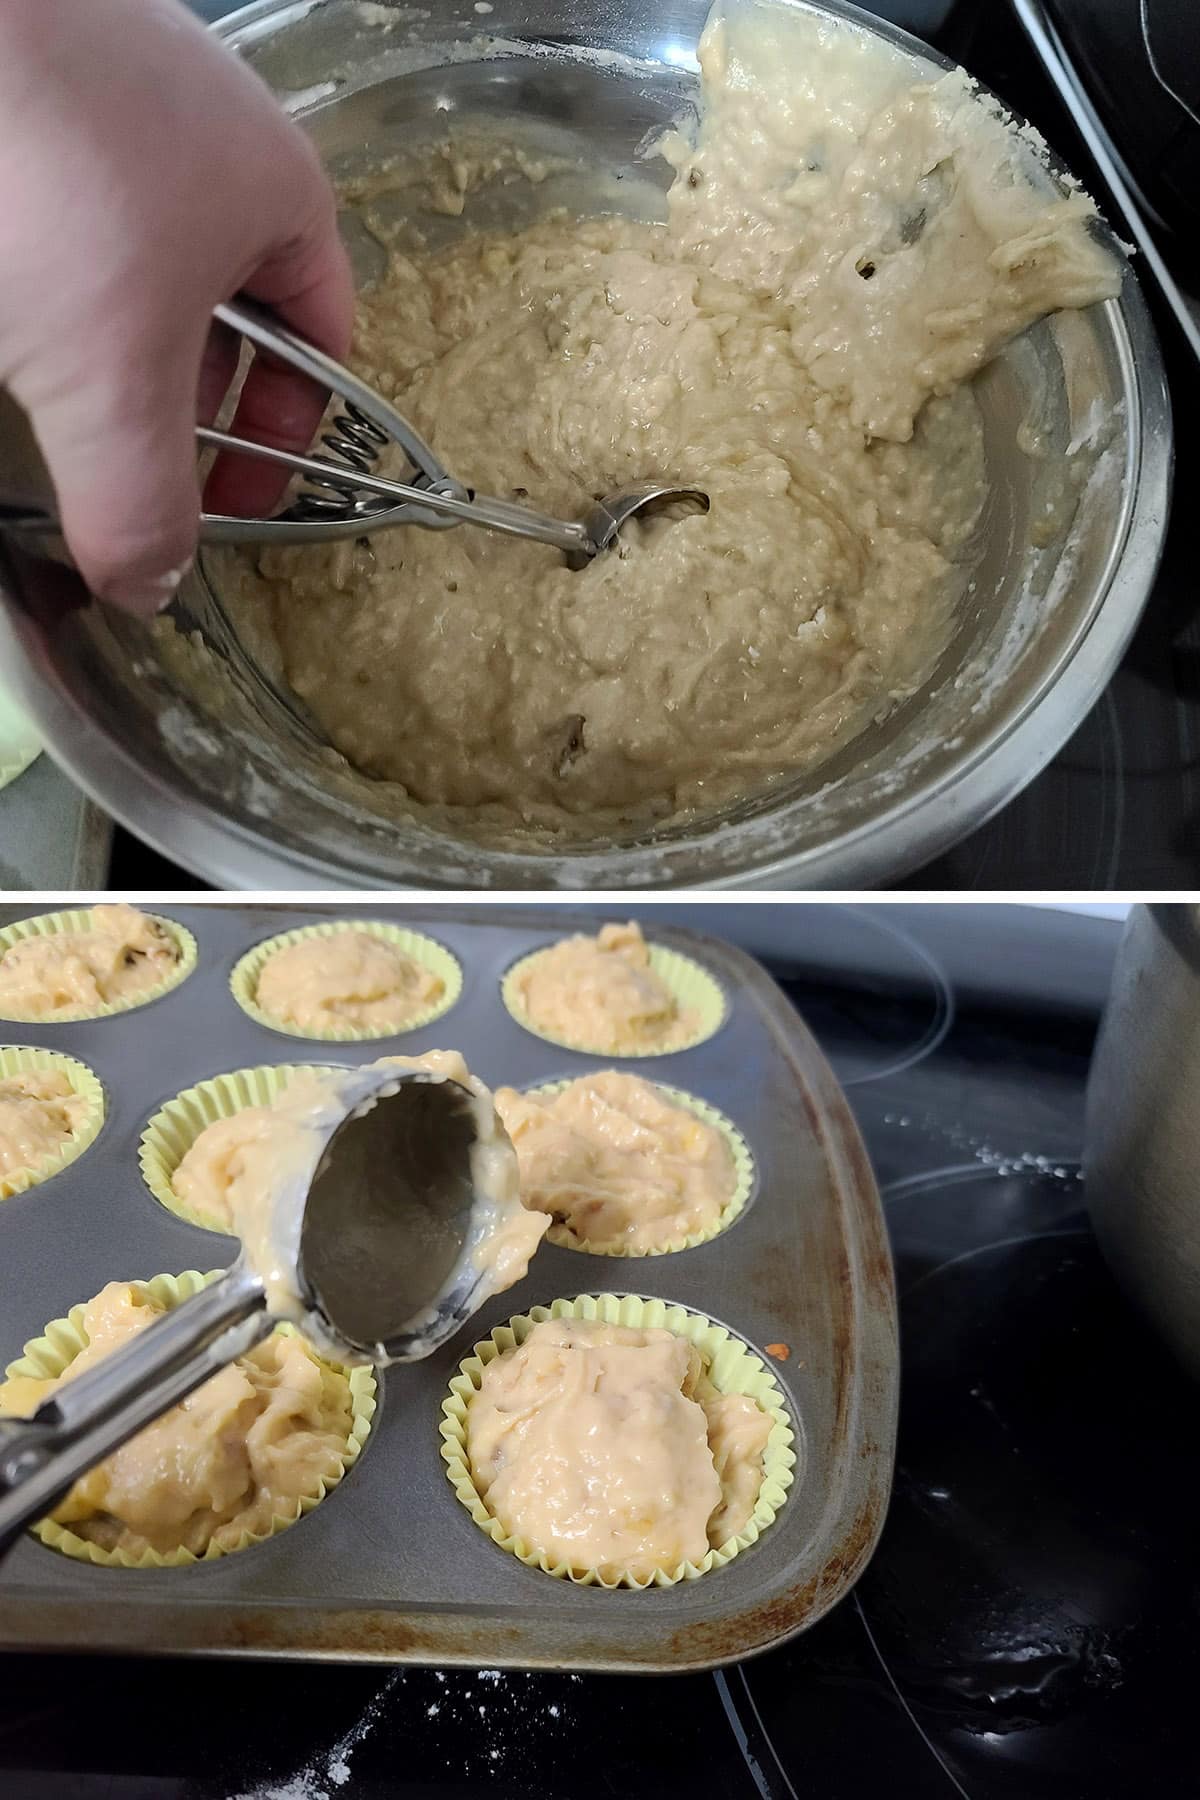 A 2 part image showing the batter being scooped into the muffin pan.